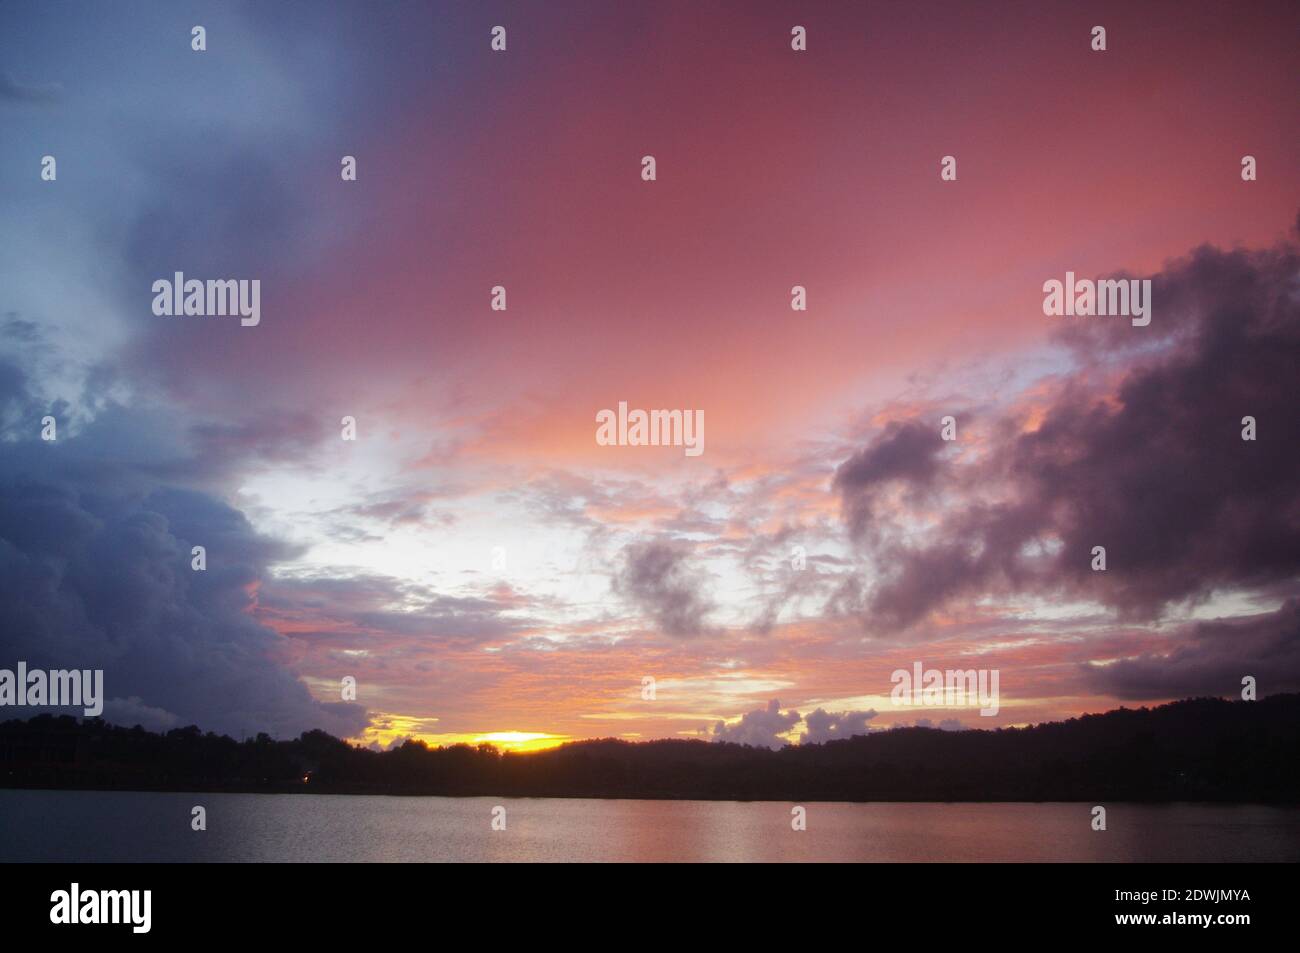 Scenic View Of Dramatic Sky Over Lake During Sunset Stock Photo